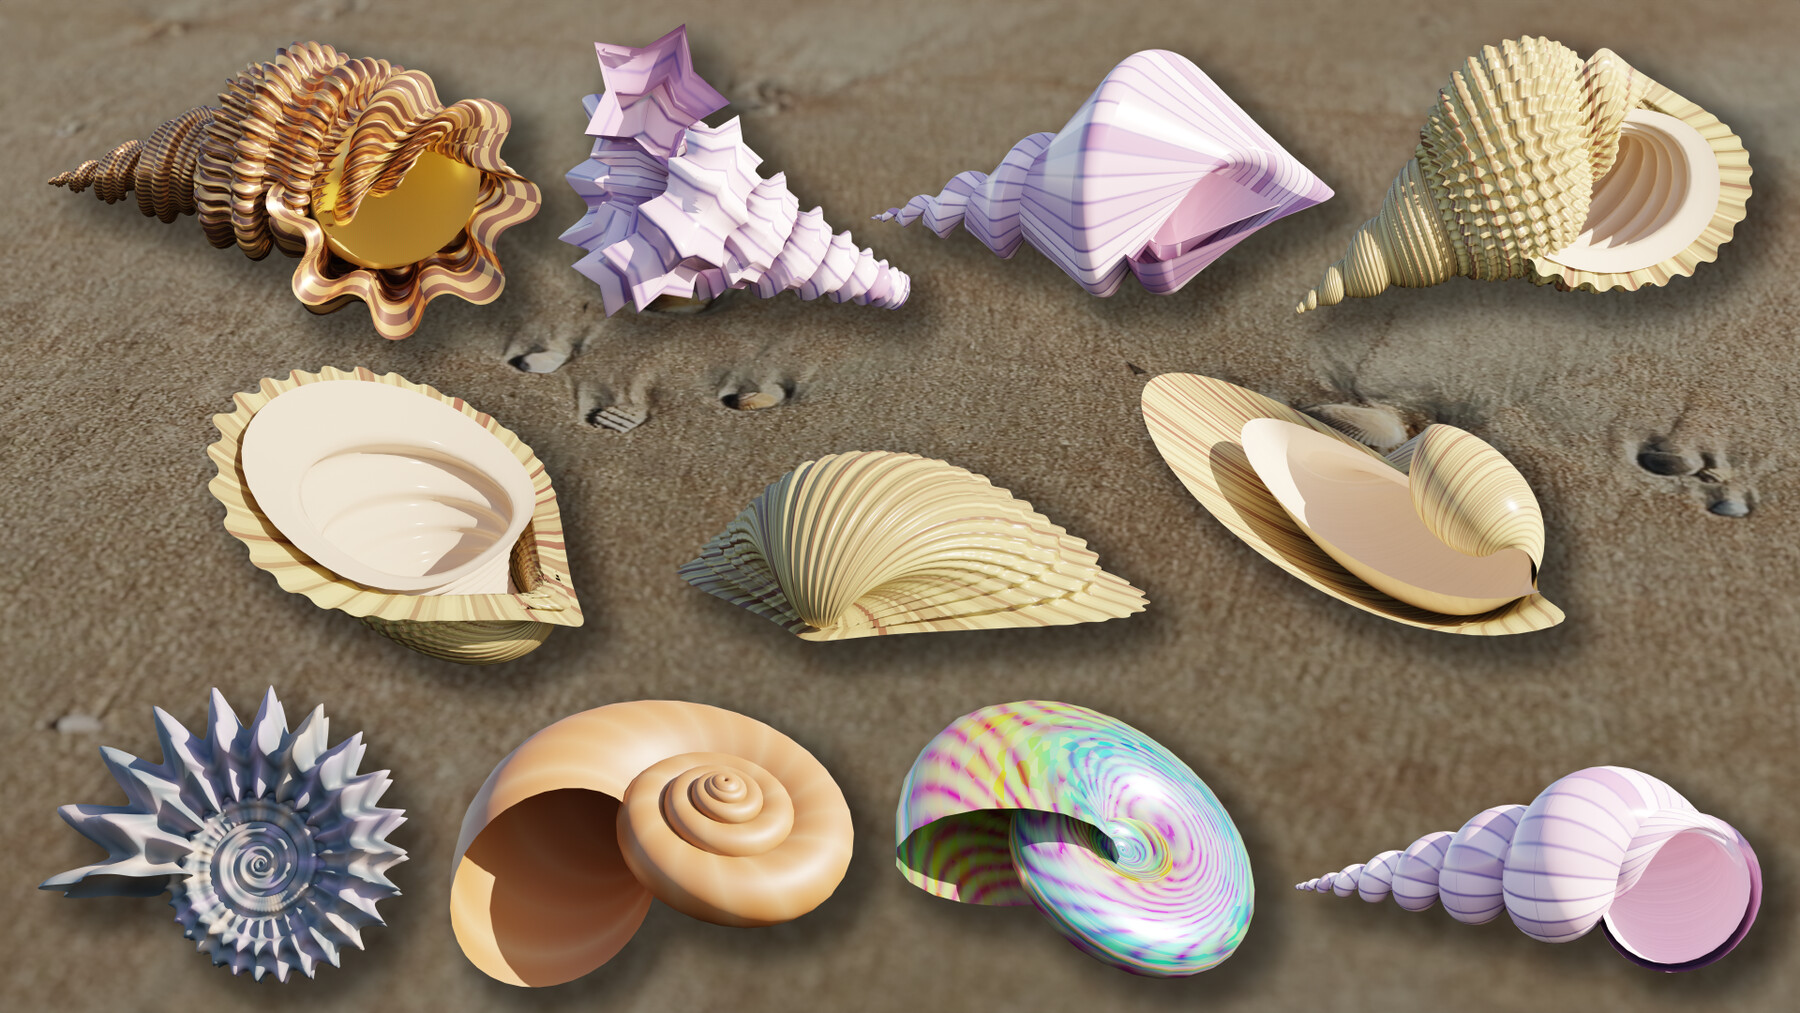 Sea Shell (Seashell) Generator for Geometry Nodes | Resources